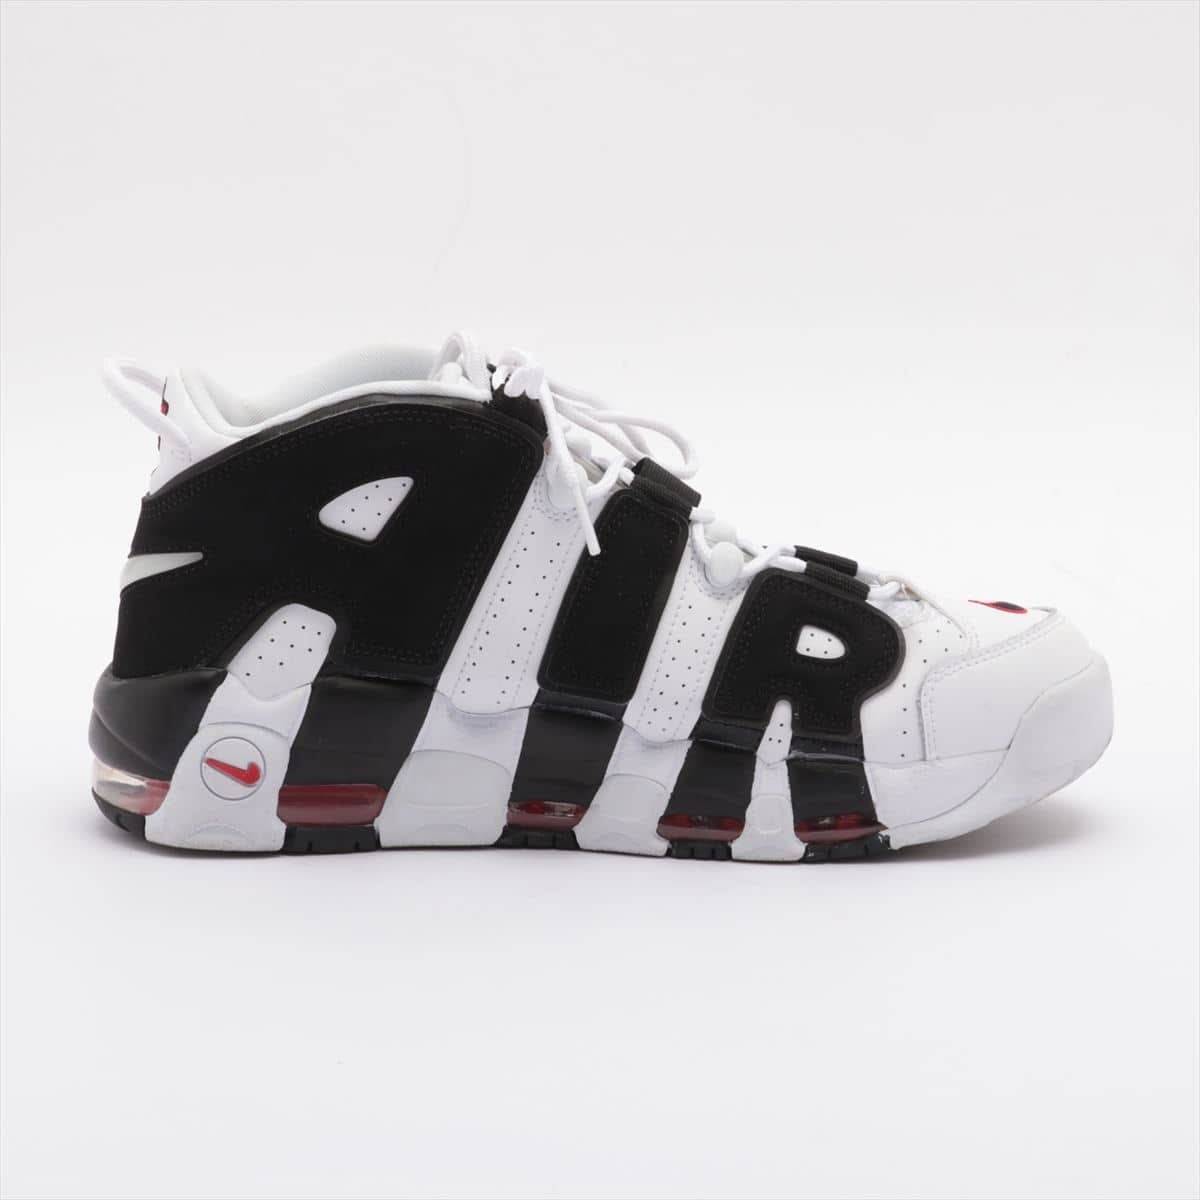 Nike Faux leather High-top Sneakers JPN28.5 Men's Black × White Air more uptempo  414962-105